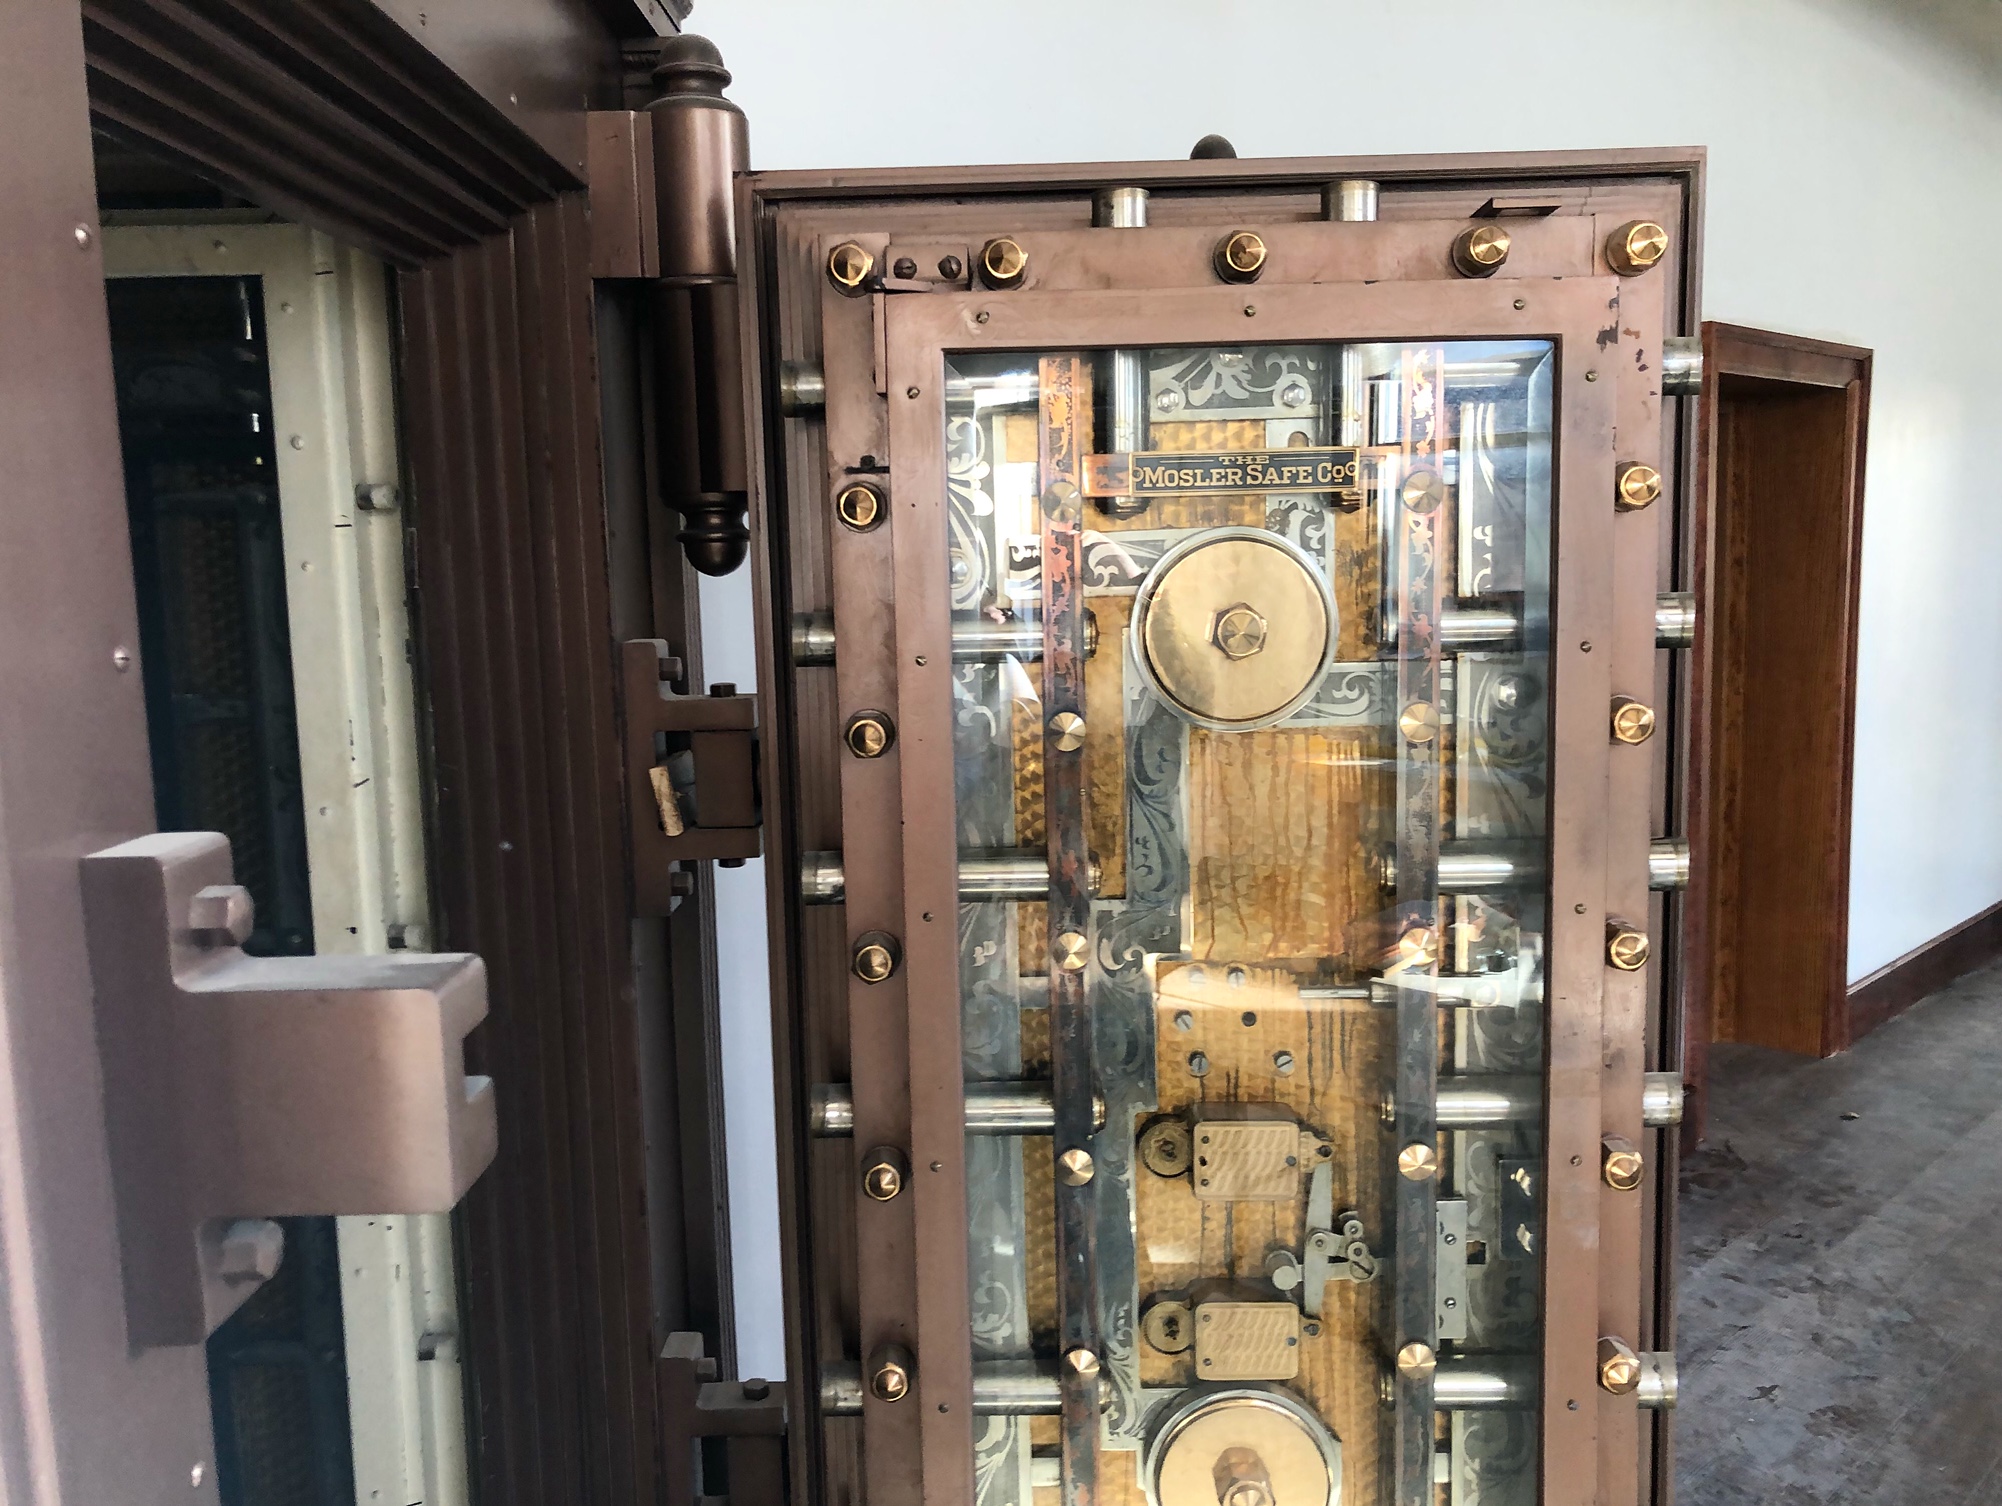 Inside a Downtown Urbana building, there is an open vault with an intricate locking set up on the metal vault door. Photo by Alyssa Buckley.